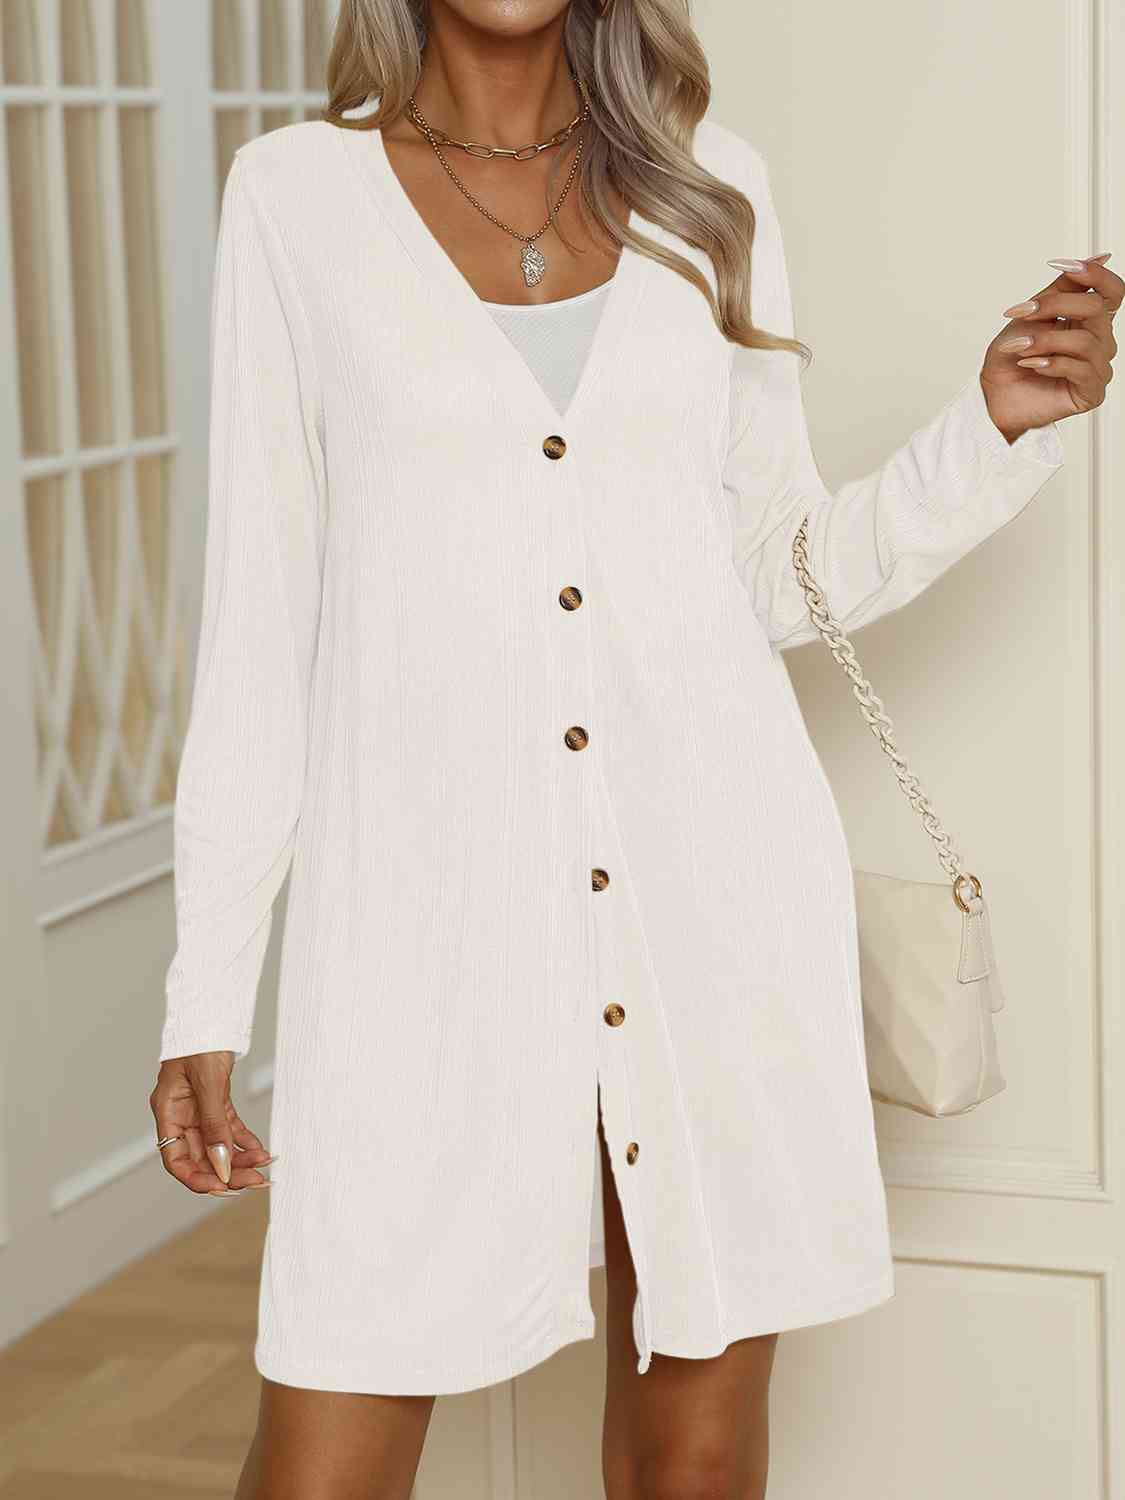 V-Neck Button Up Long Sleeve Cardigan Print on any thing USA/STOD clothes